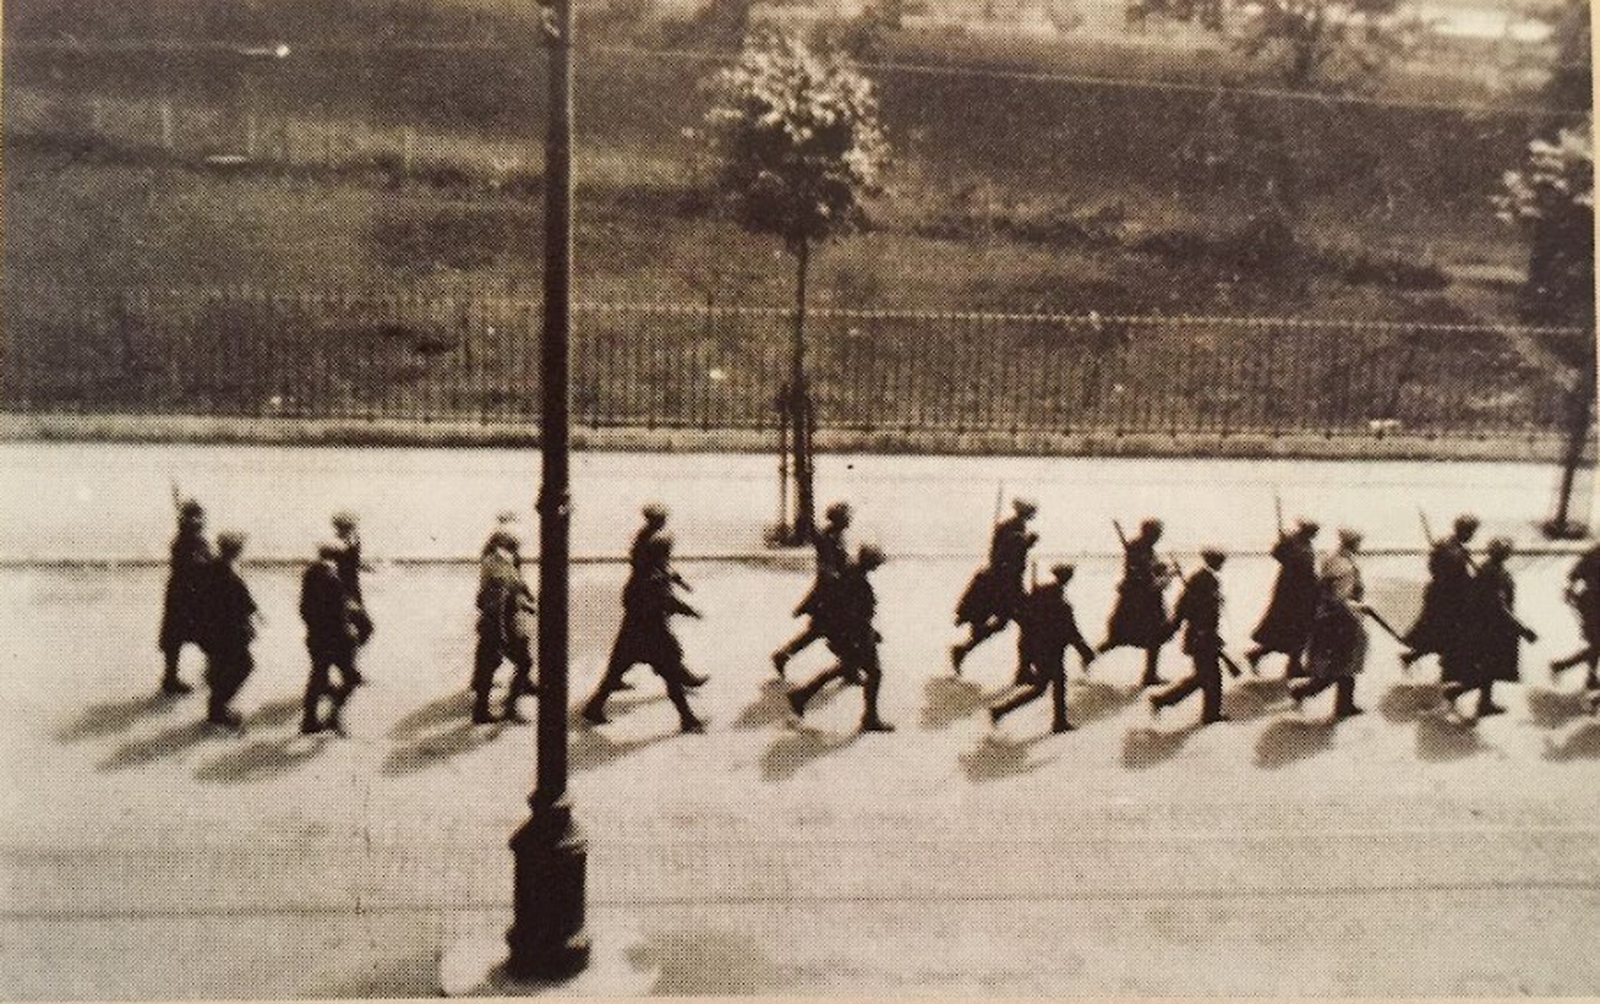 Image - RETREAT: An extremely rare photograph, snatched in secret, of IRA fighters evacuating Cork city, just ahead of the National Army's advance on 10 August (Pic: Prof W.J O' Donovan /Military Archives/Imperial Hotel)